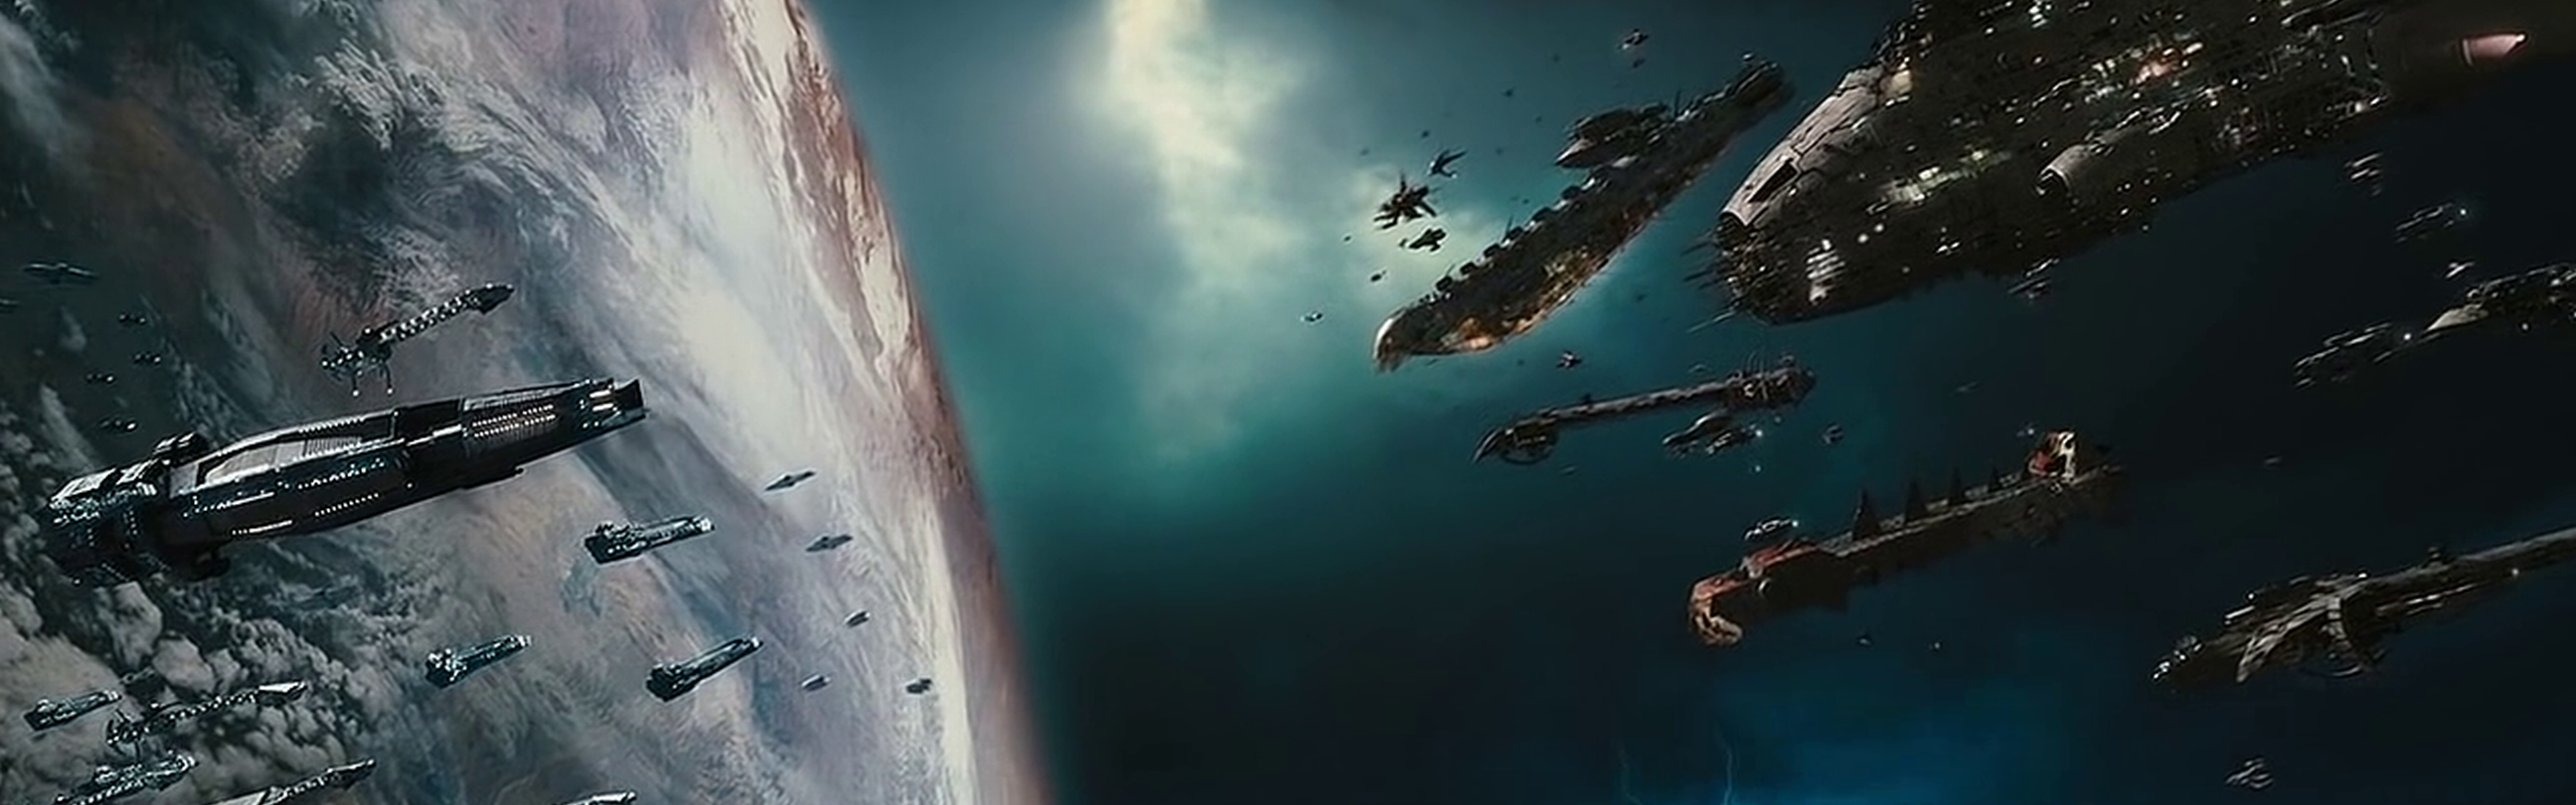 Dual Monitor Wallpapers - Serenity Space Battle - HD Wallpaper 